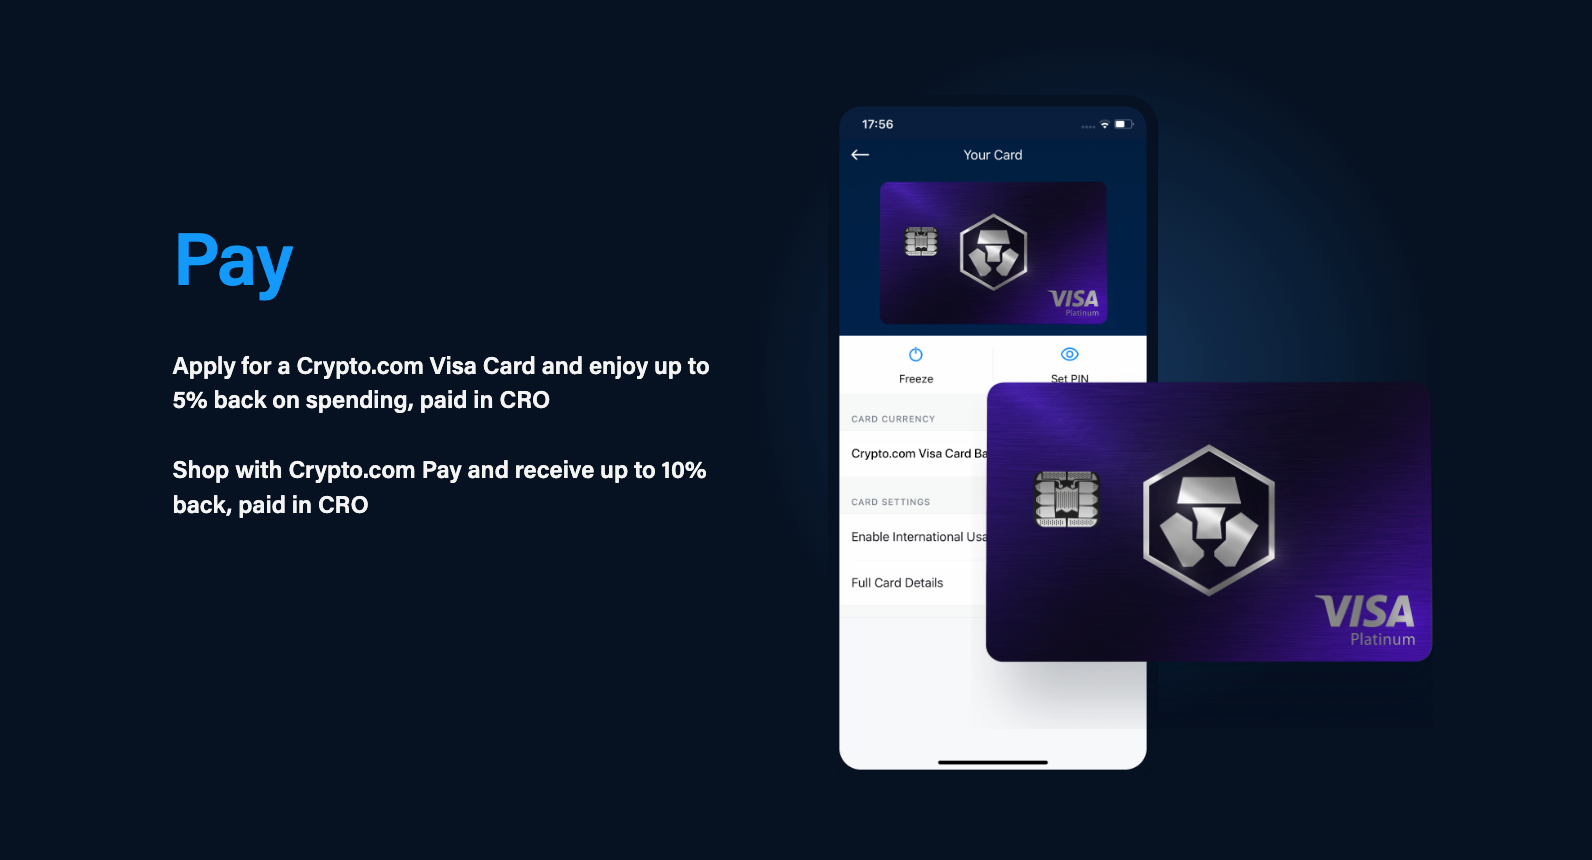 CRO card to spend your crypto. 